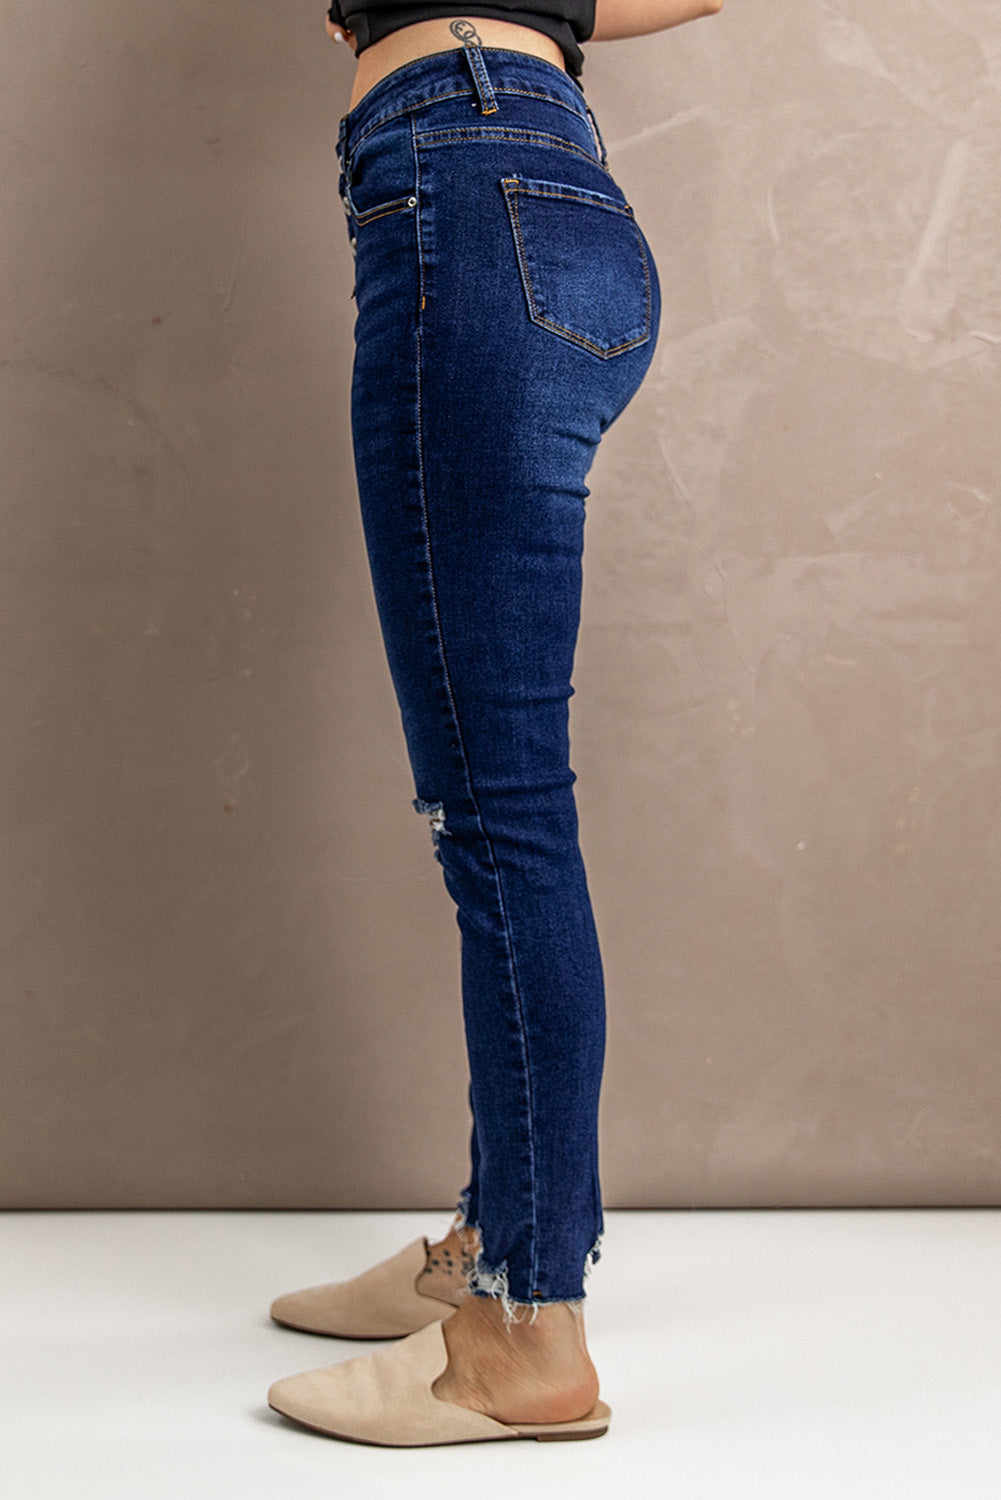 Fashion Blue Ripped Button Fly Skinny Jeans